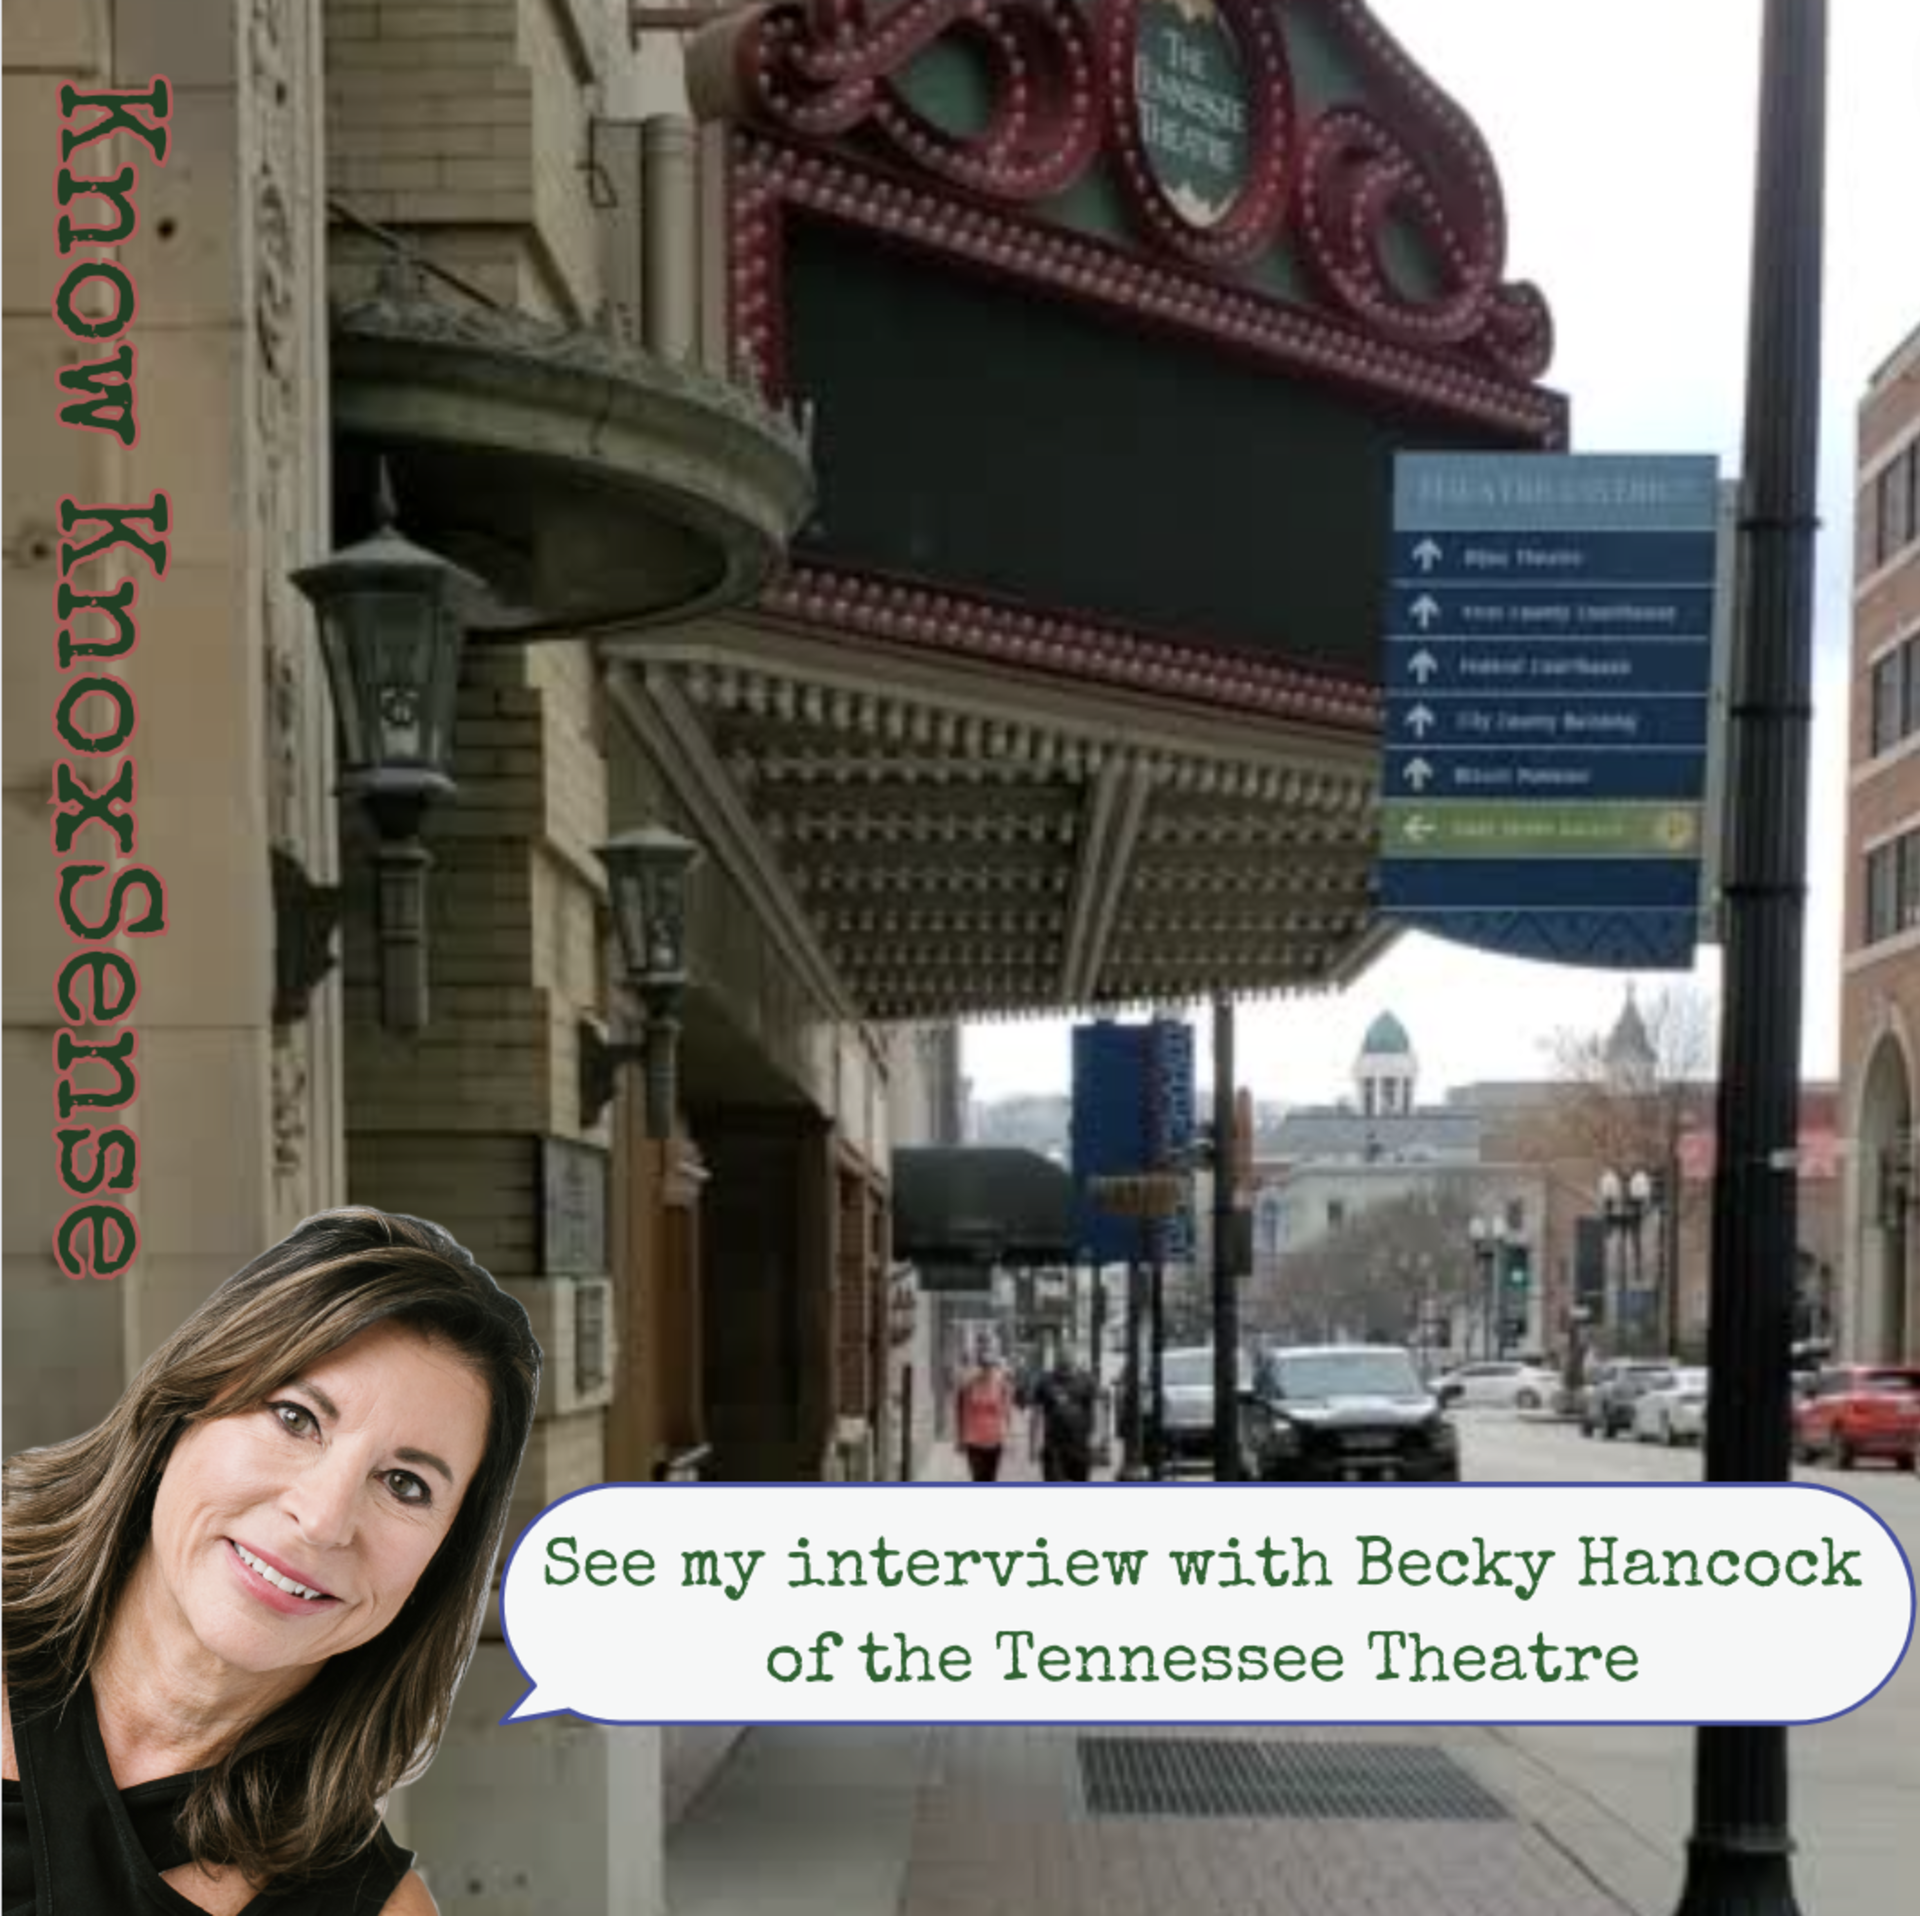 Know Knoxsense: Tennessee Theatre